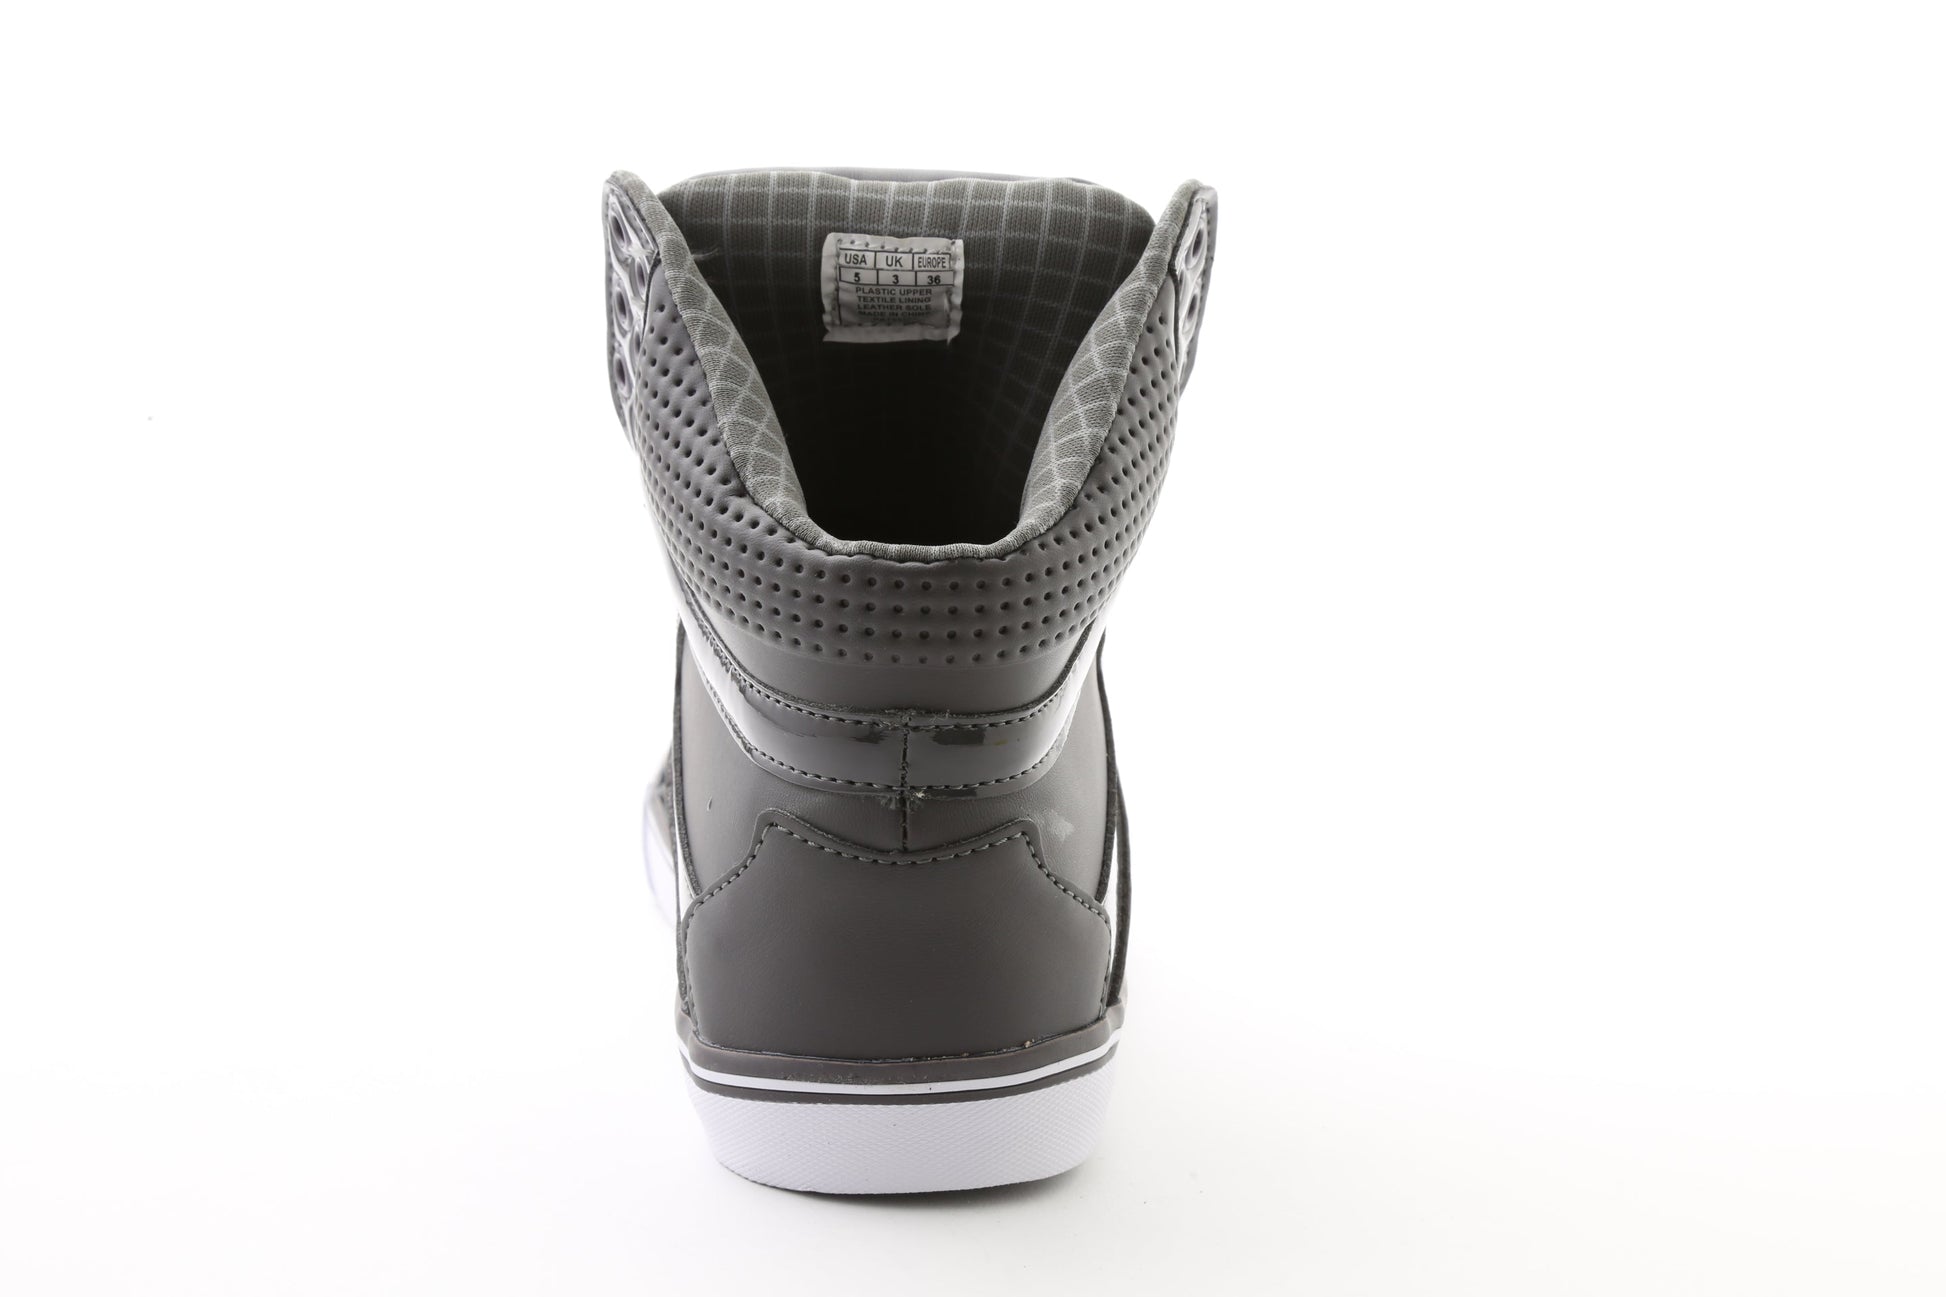 Pastry Pop Tart Grid Youth Sneaker in Charcoal back view